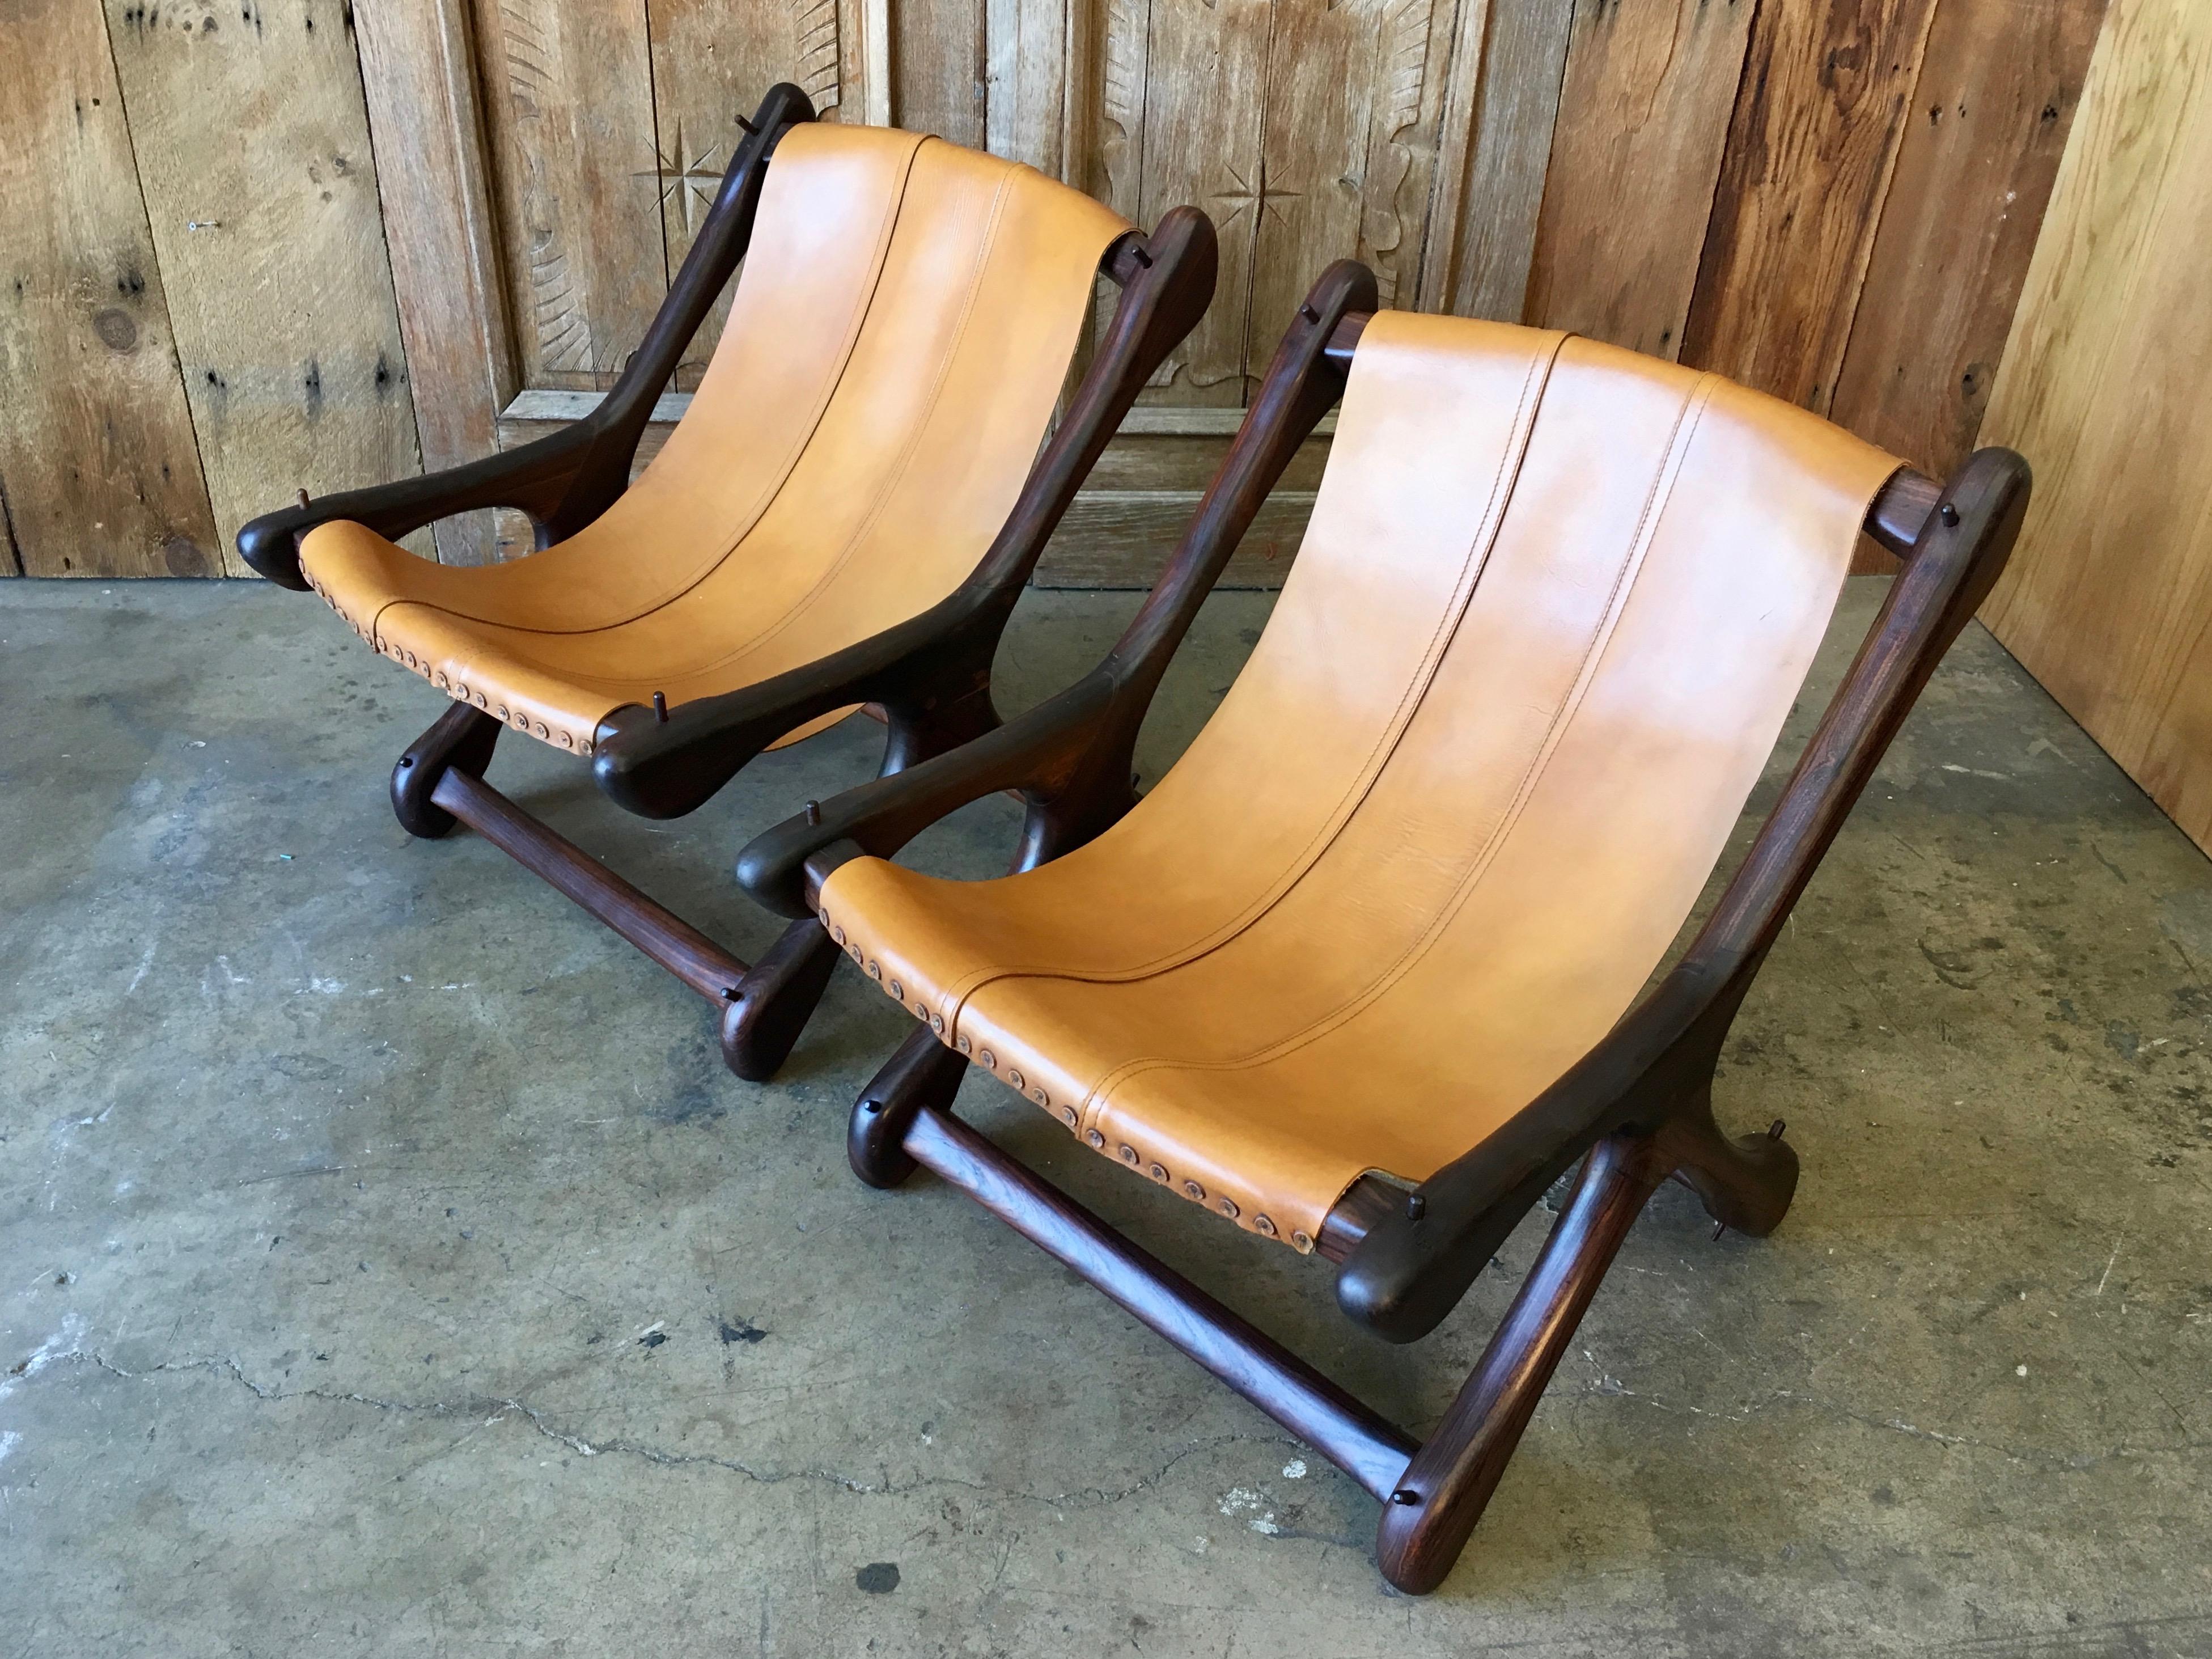 A pair of sling chairs designed by Don Shoemaker for Señal Furniture in Mexico circa 1960s.
The Sling 